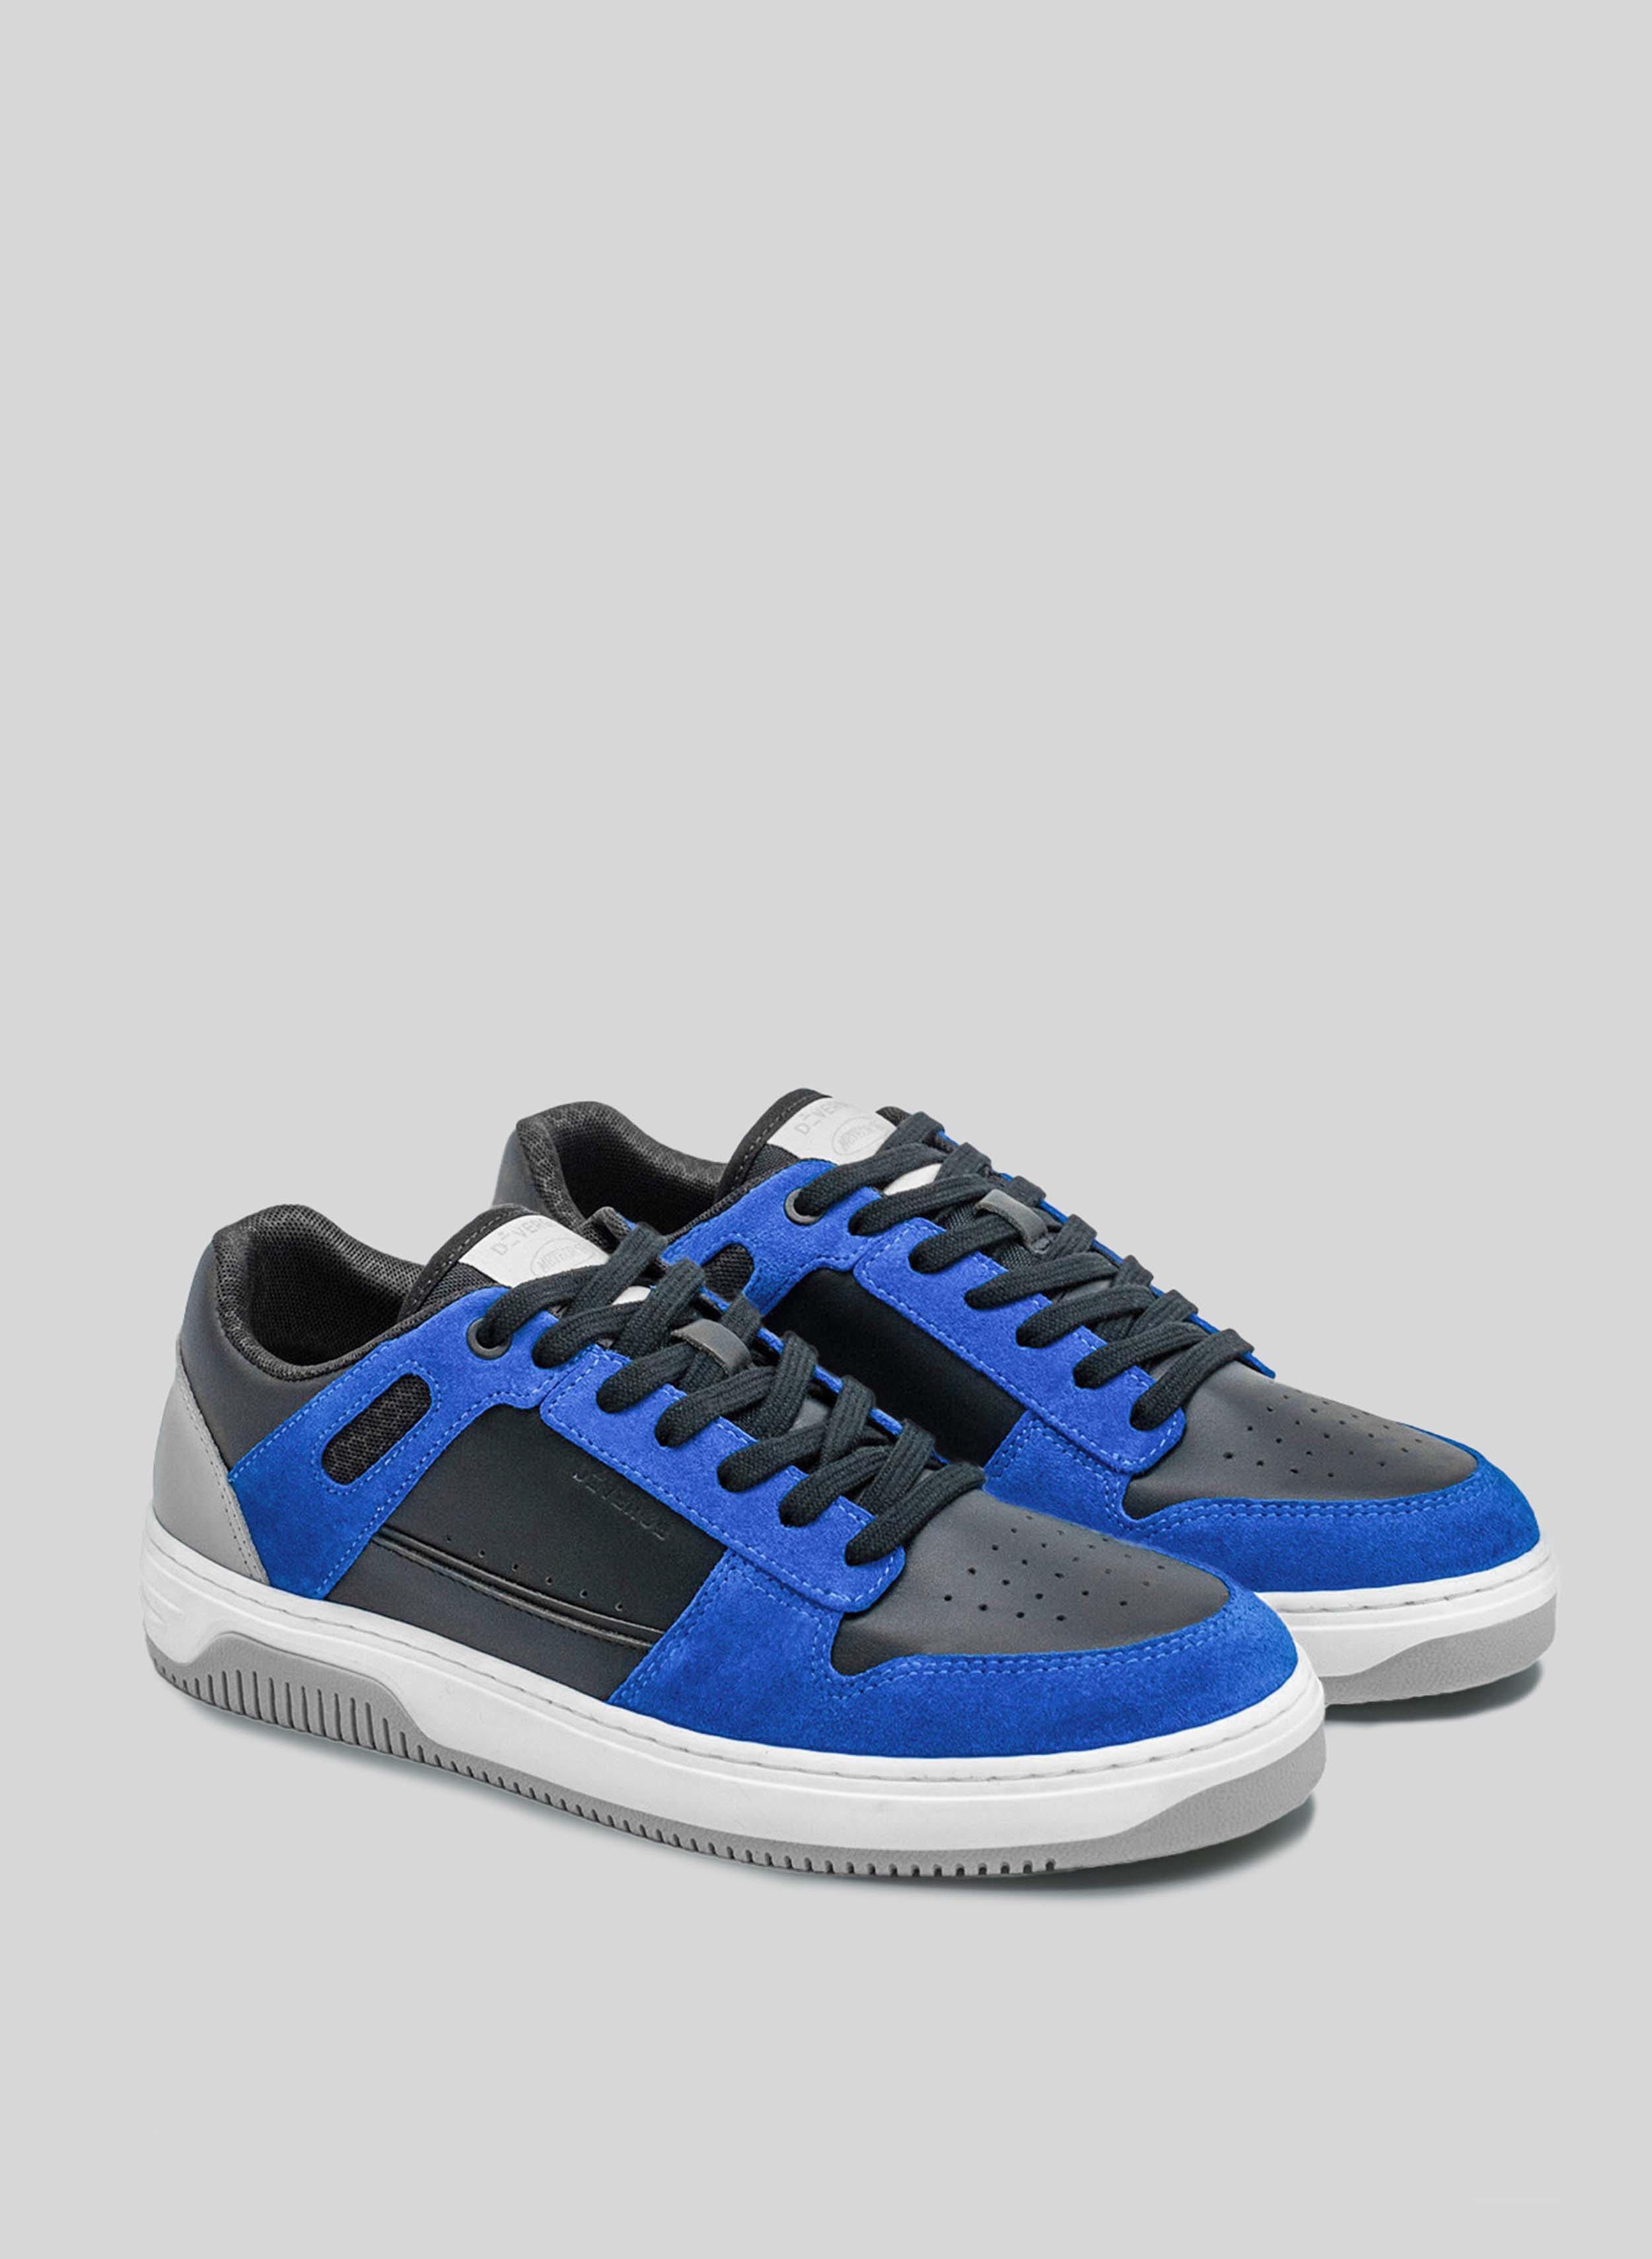 Blue and black sneakers with white and grey sole by Diverge, promoting social impact and custom shoes throught the imagine project. 